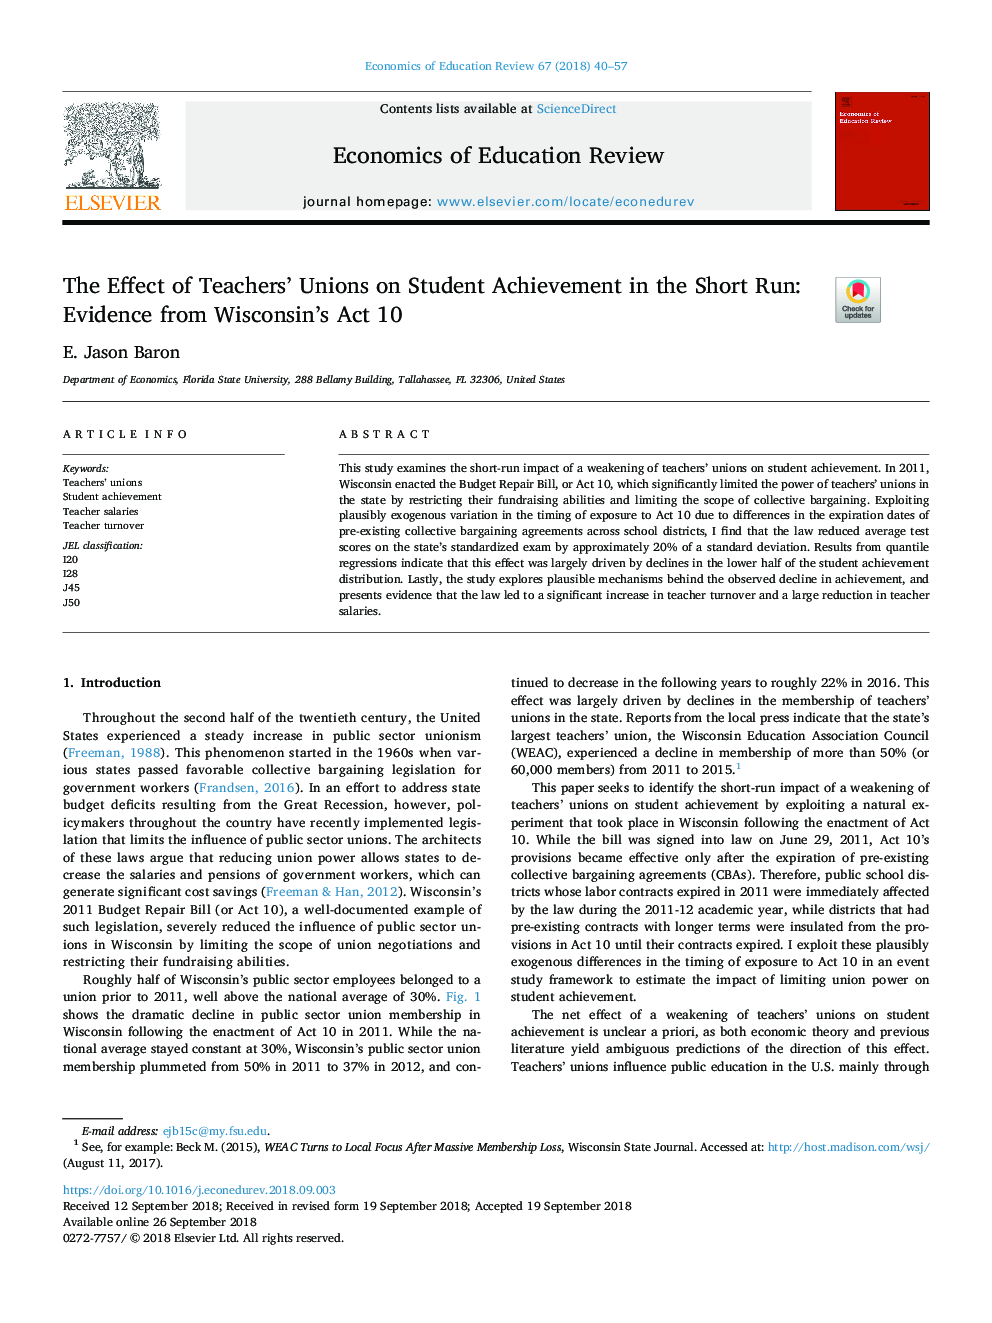 The Effect of Teachers' Unions on Student Achievement in the Short Run: Evidence from Wisconsin's Act 10